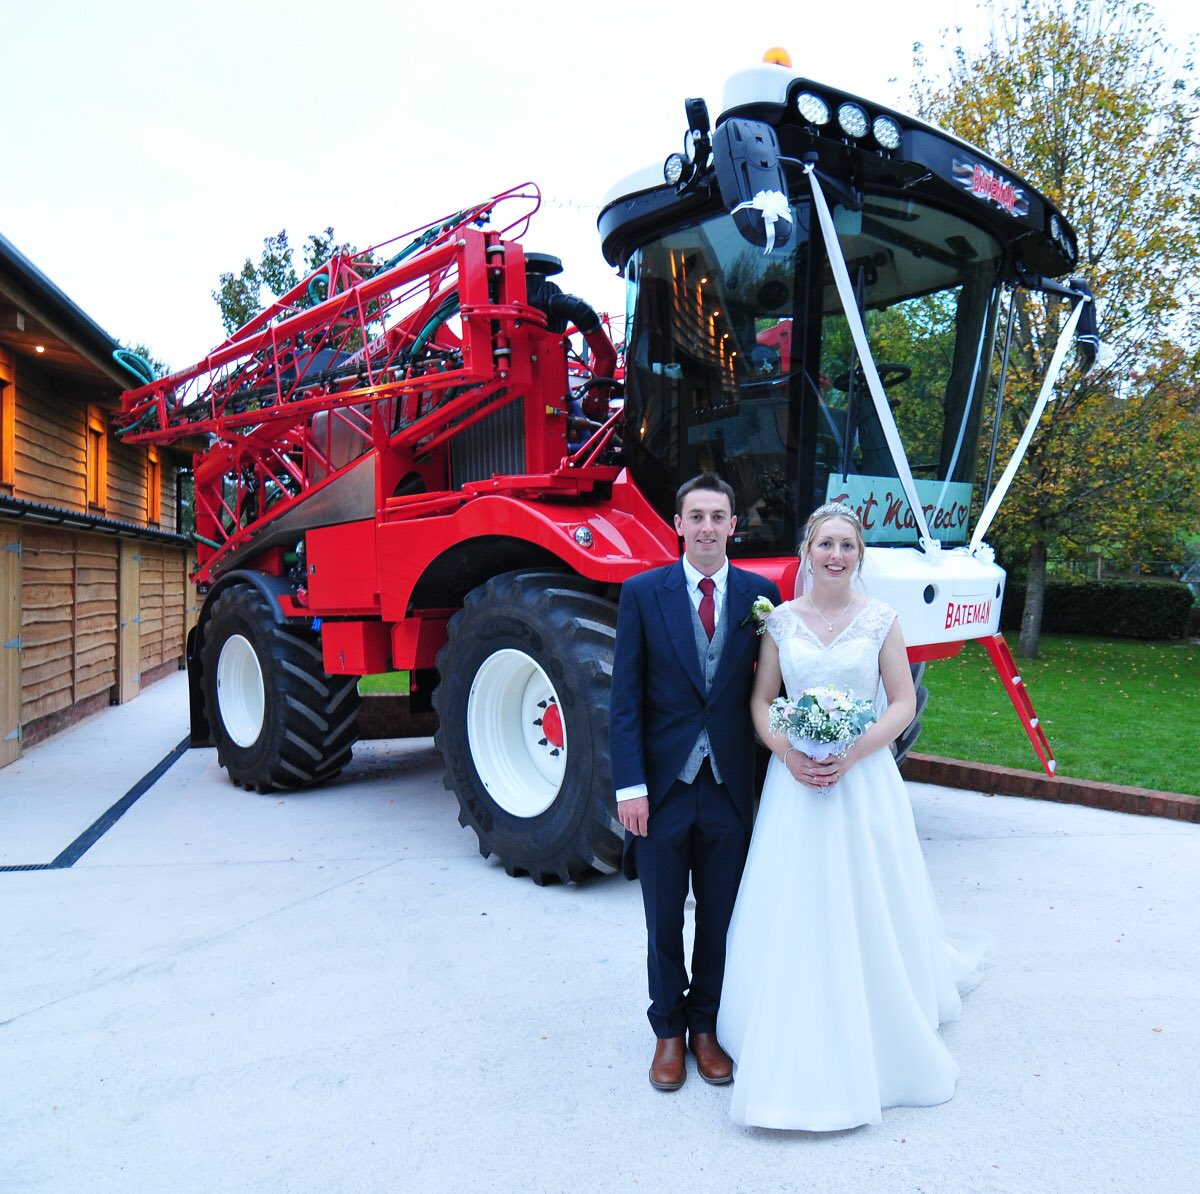 Phil & Lara were our first couple to have a wedding reception in the barn a year ago. We'll never forget their arrival from church on a crop sprayer - it was HUGE! A year has whizzed by since this lovely autumn wedding we wish them a very happy 1st anniversary! #devonweddings